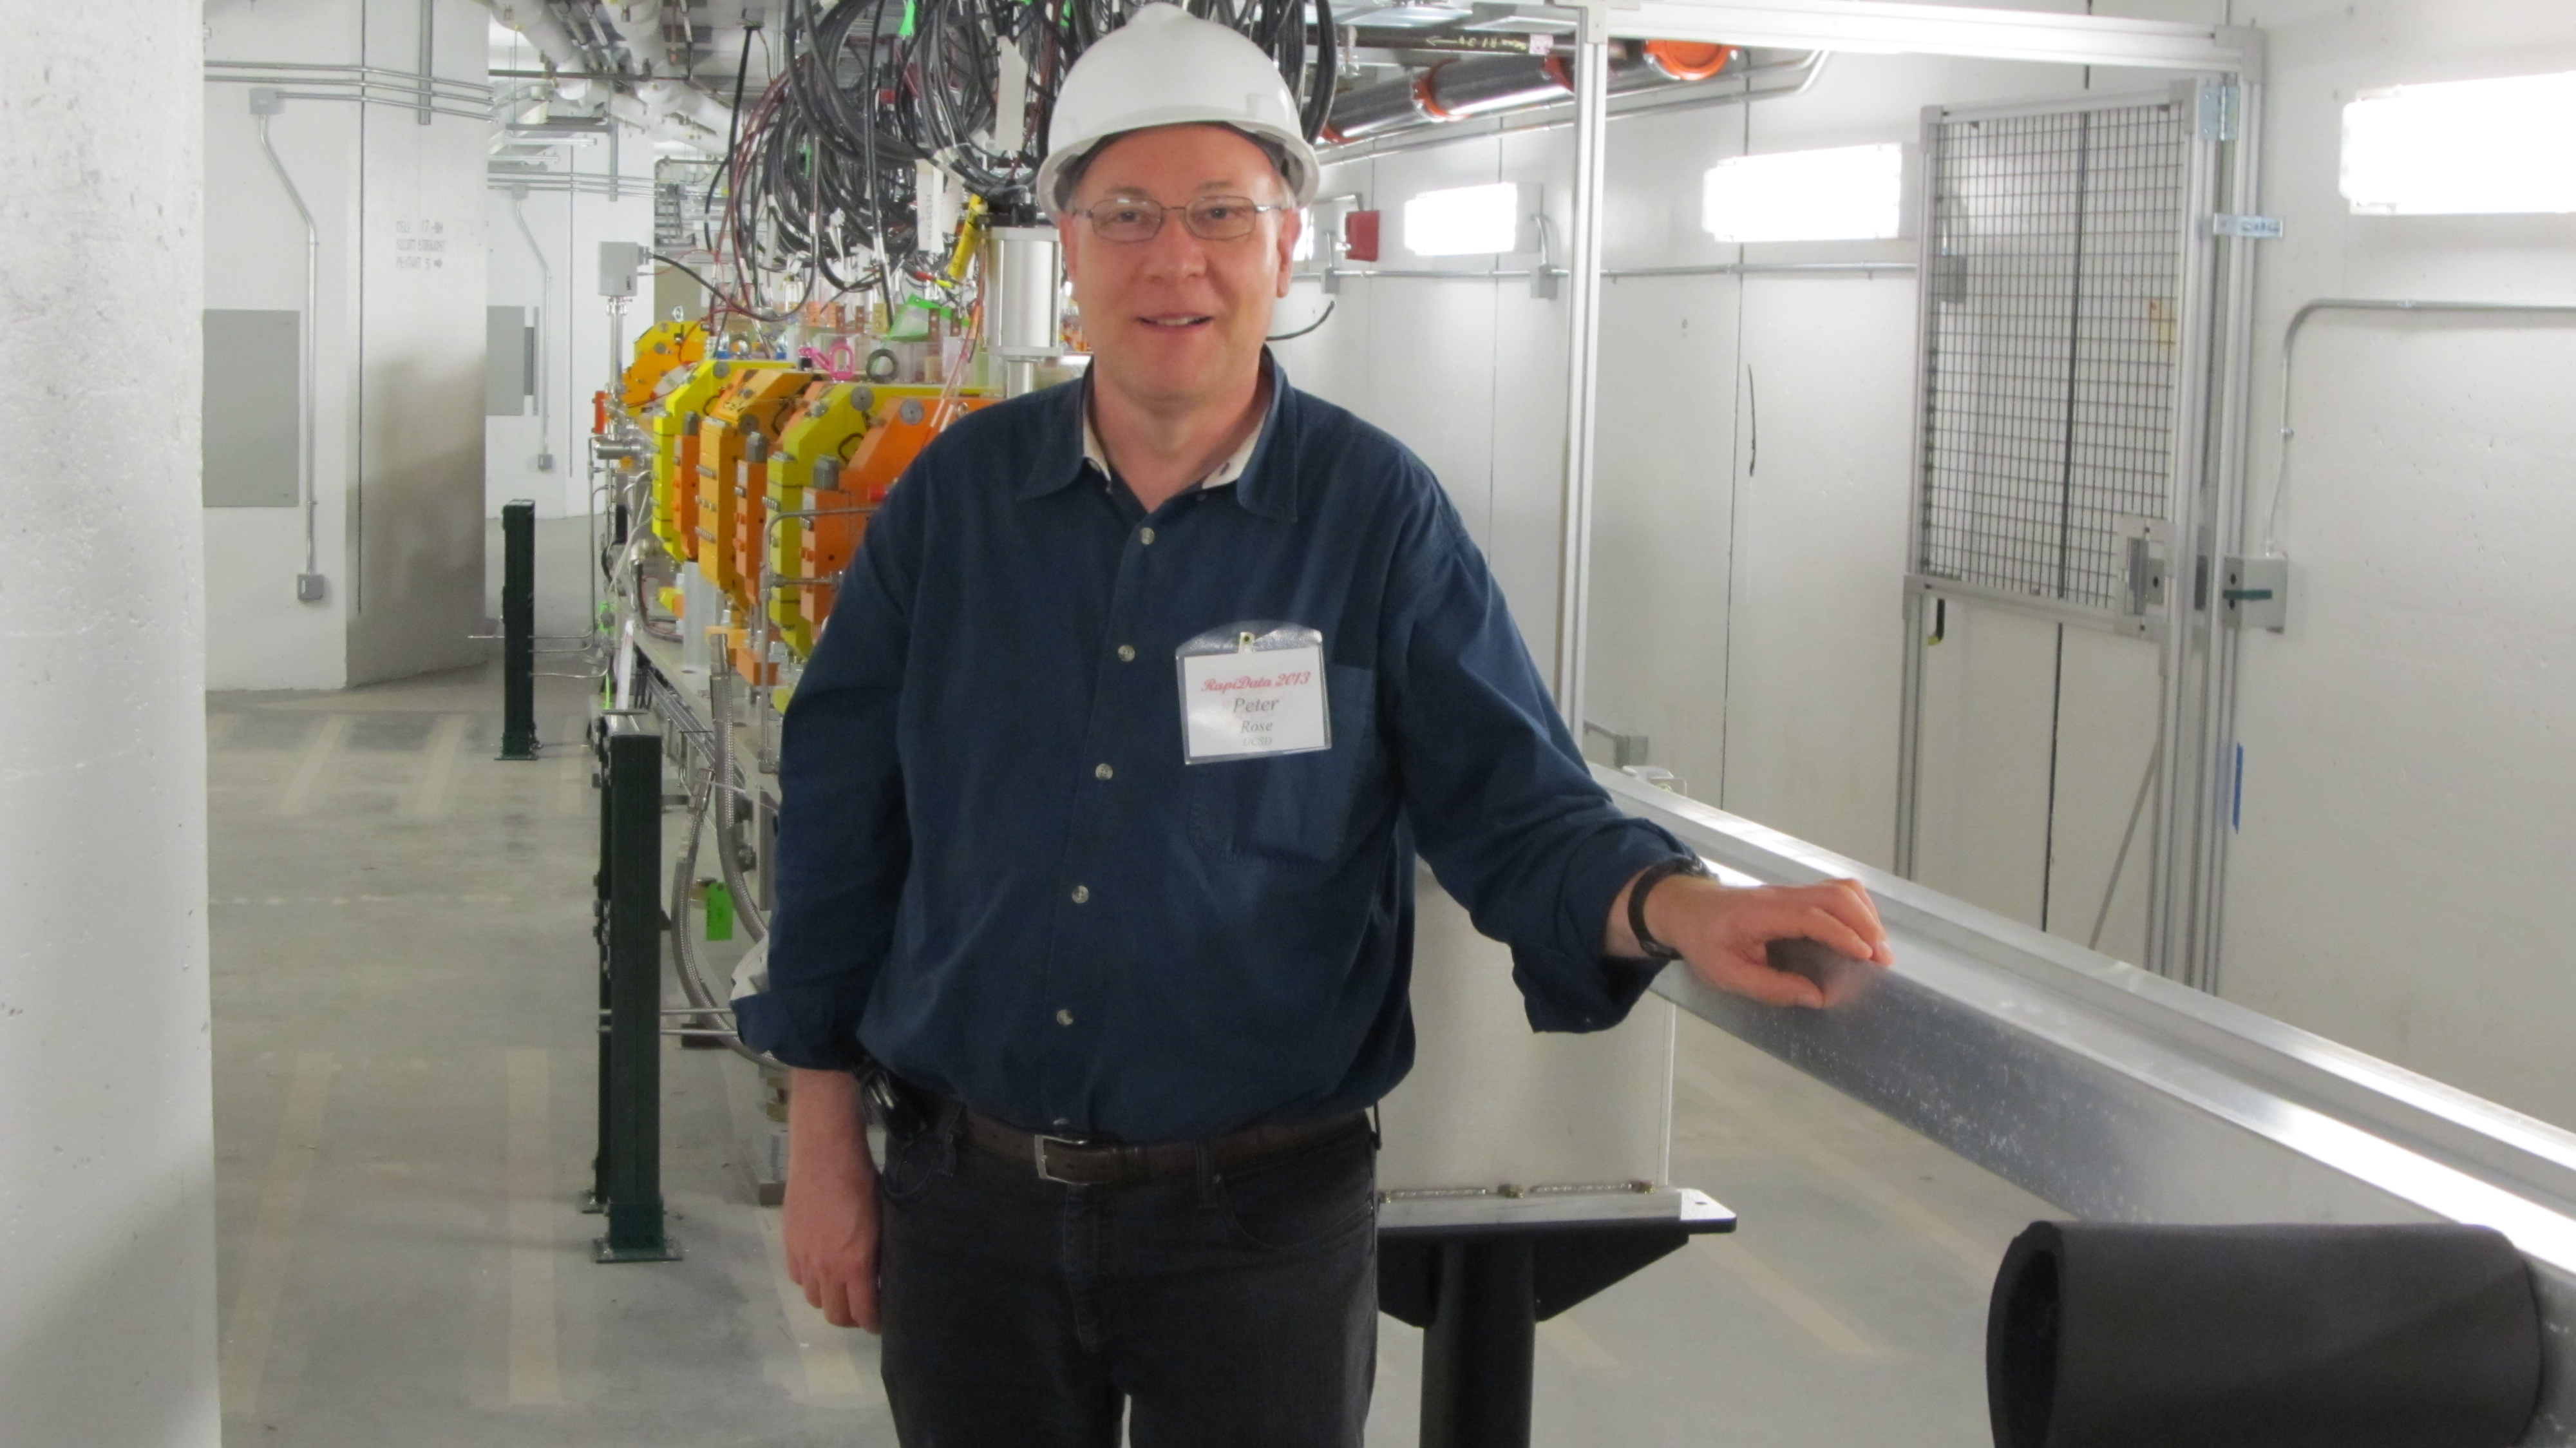 As part of RapiData 2013, RCSB PDB's Peter Rose visited the new National Synchrotron Light Source II at BNL